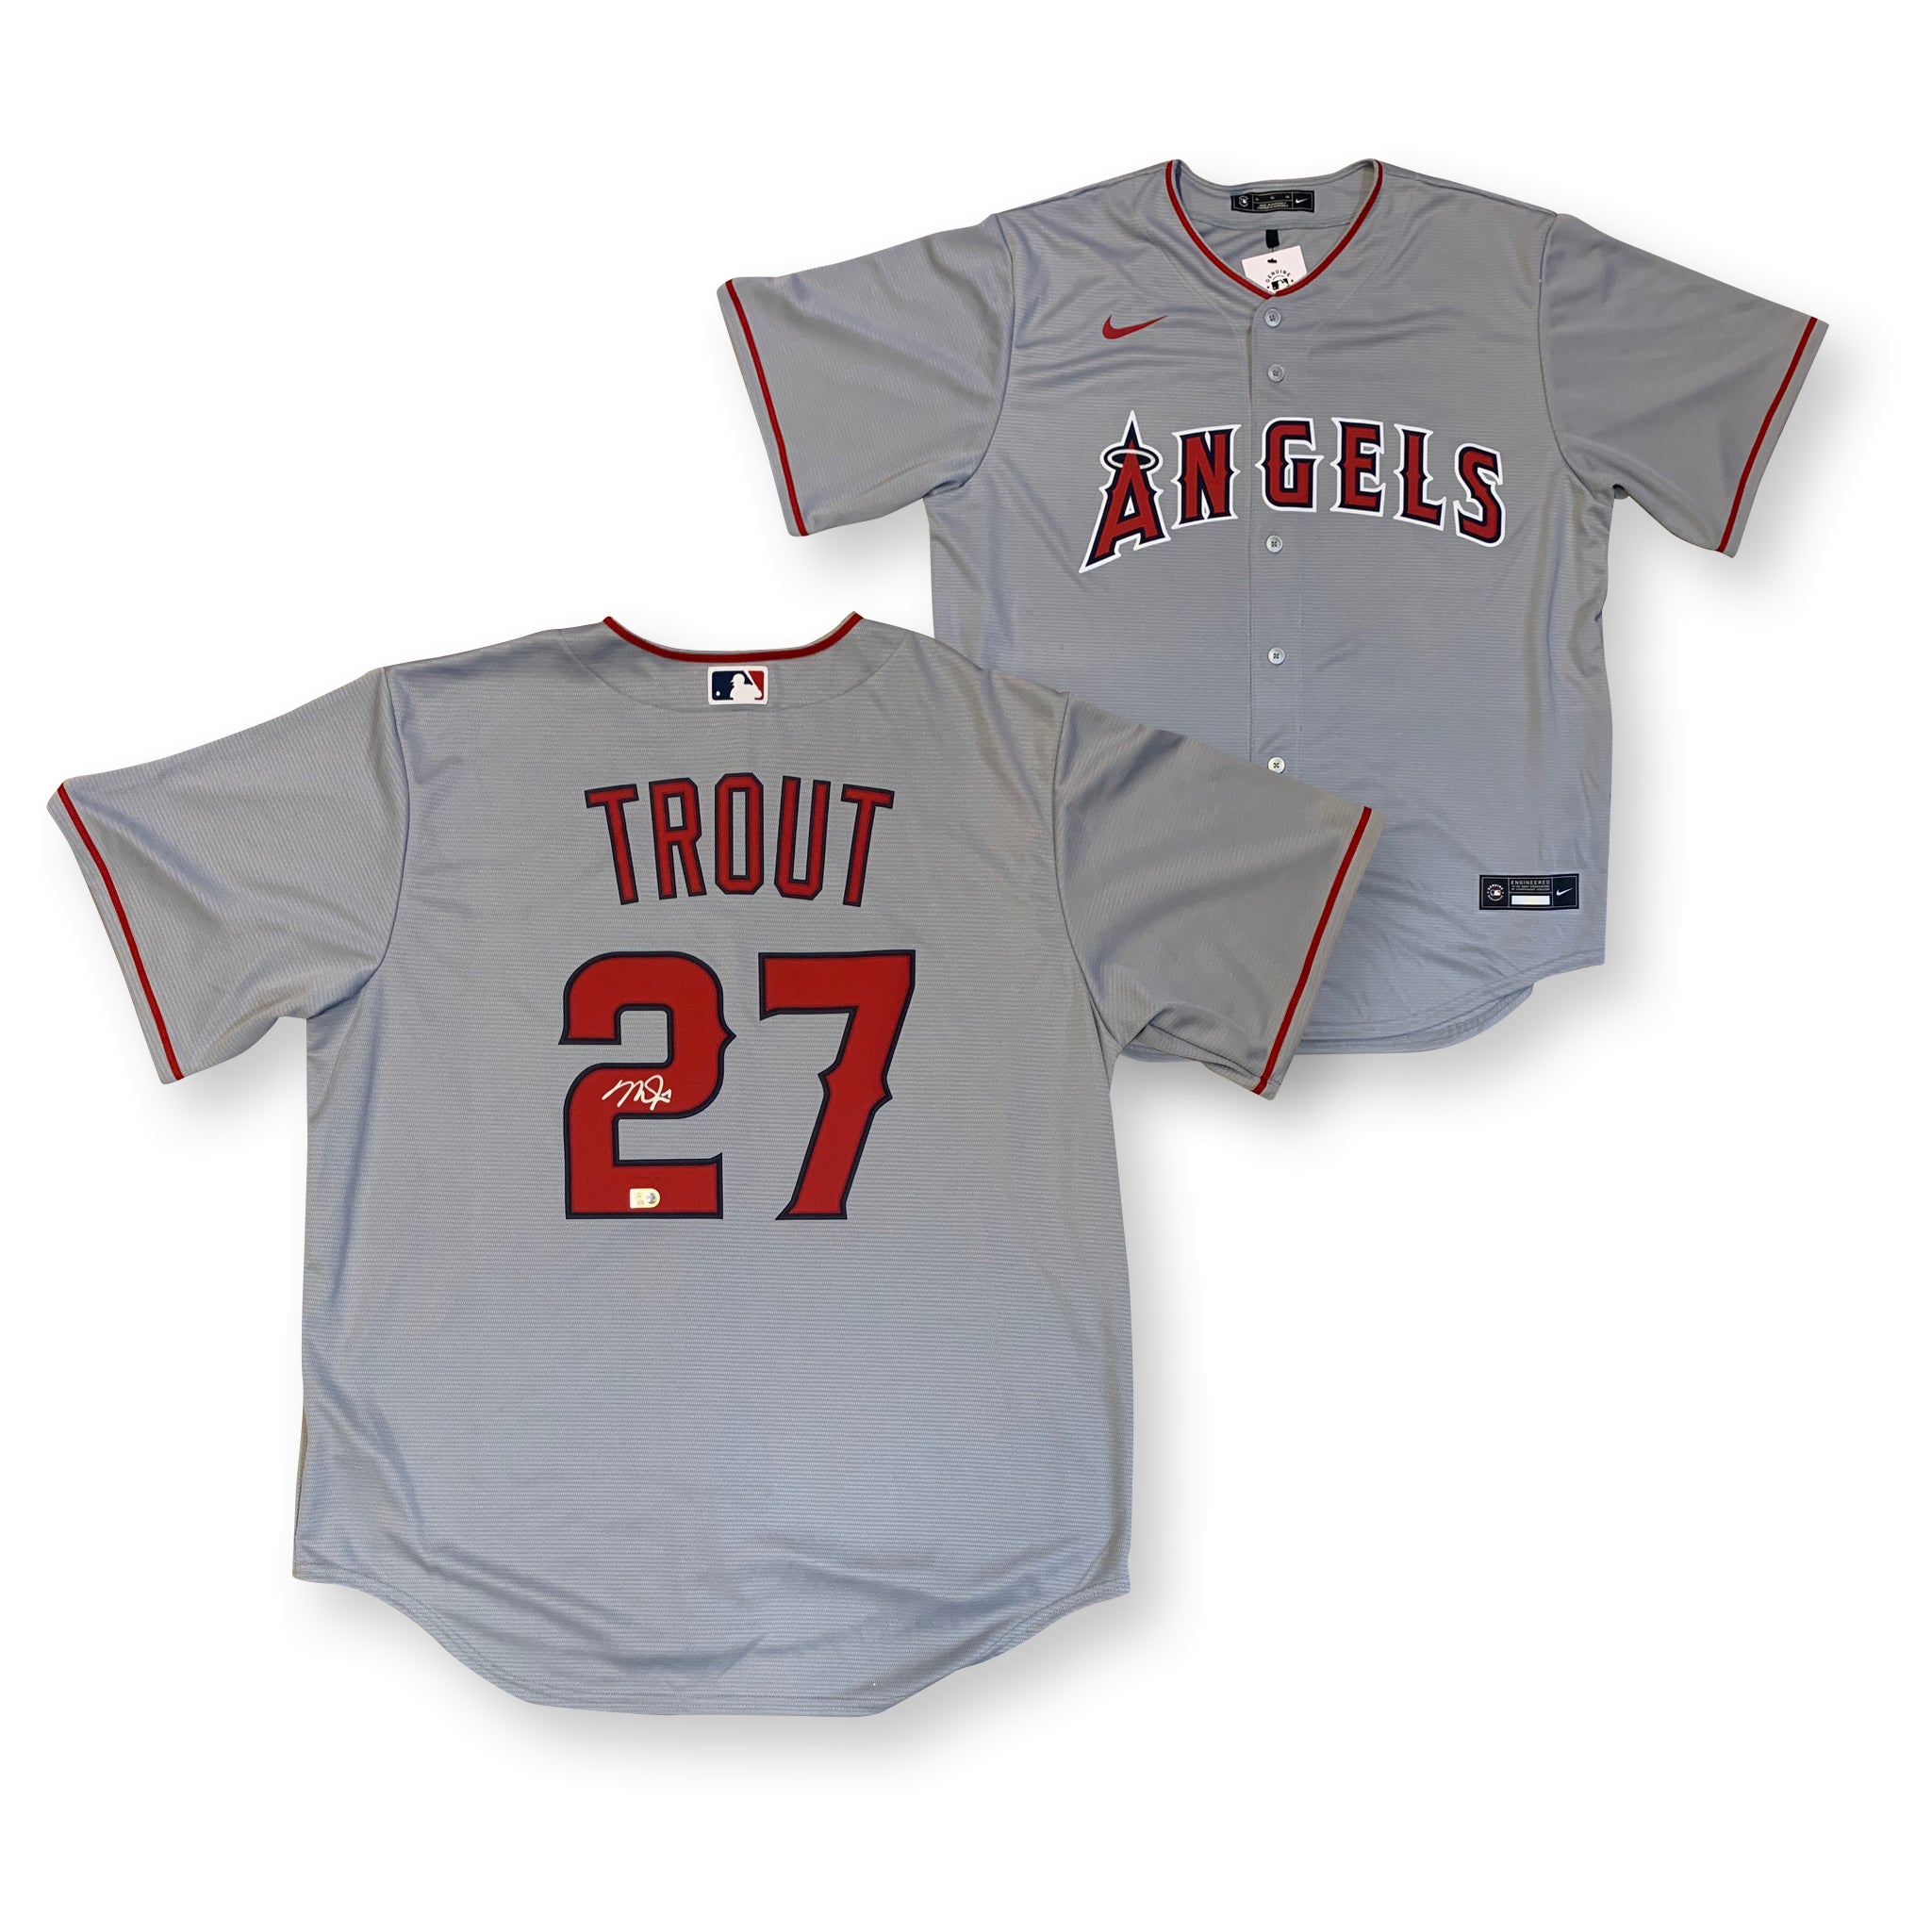 Mike trout angels jersey